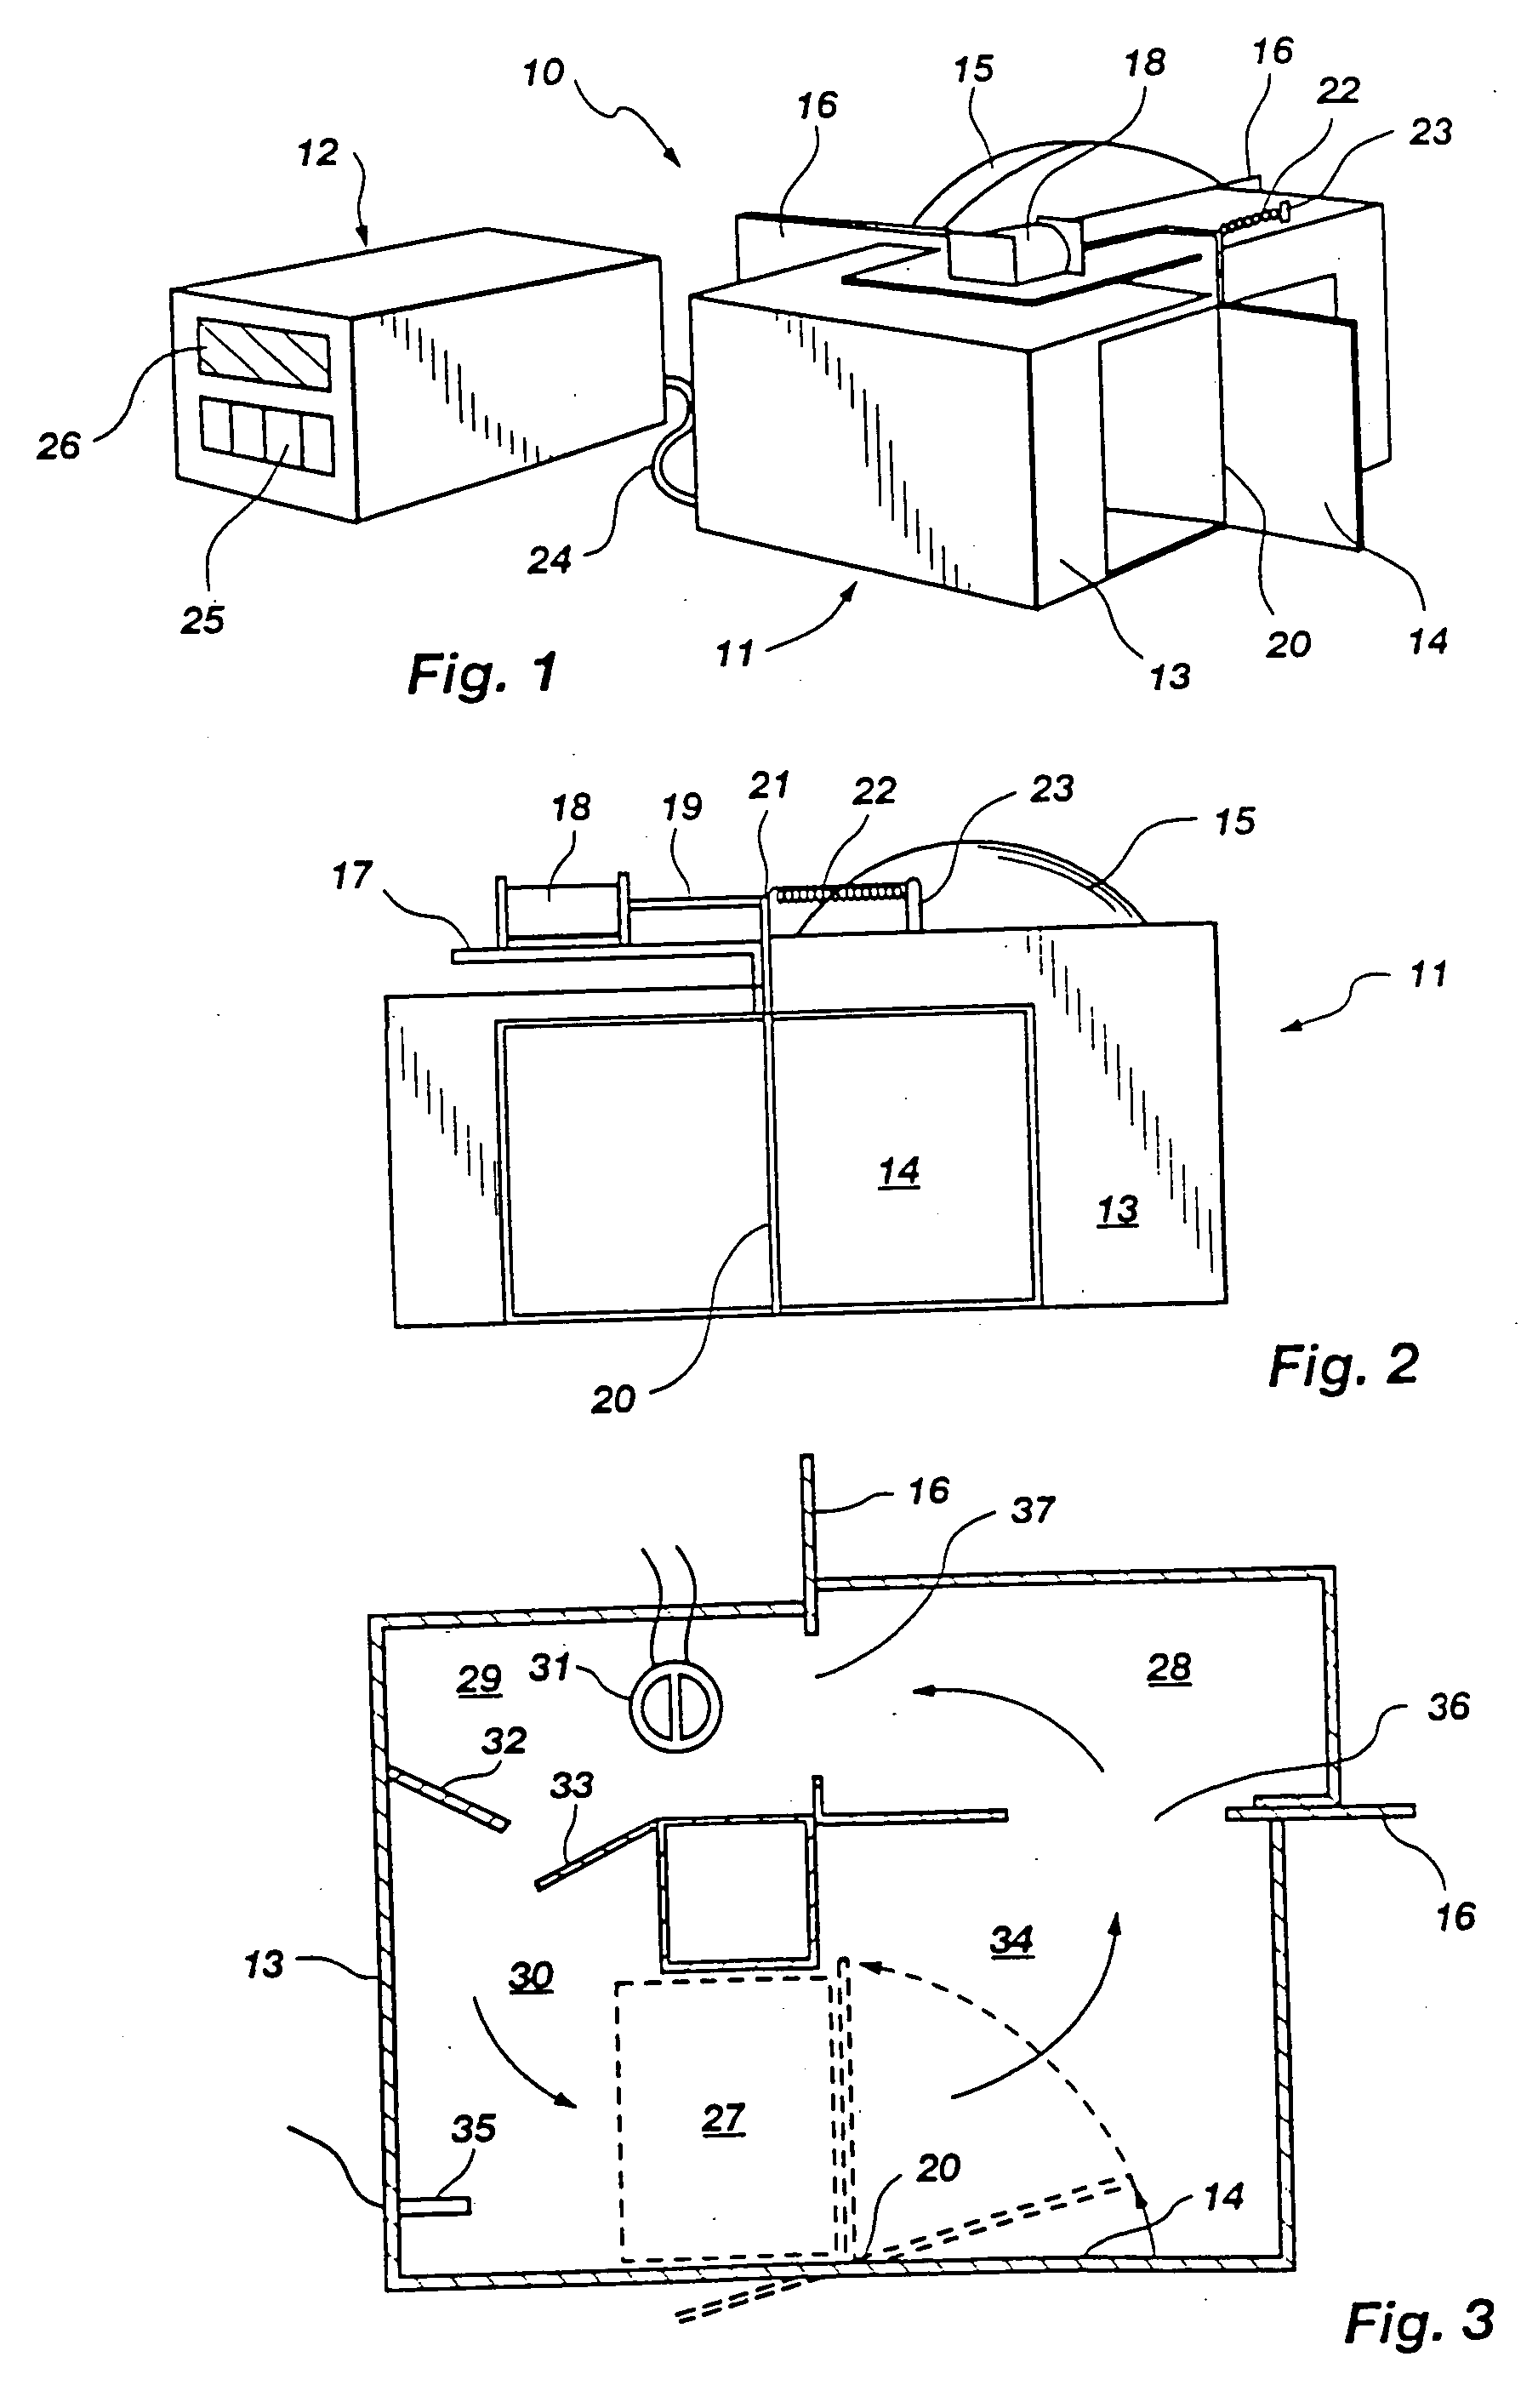 Container for carrying out and monitoring biological processes